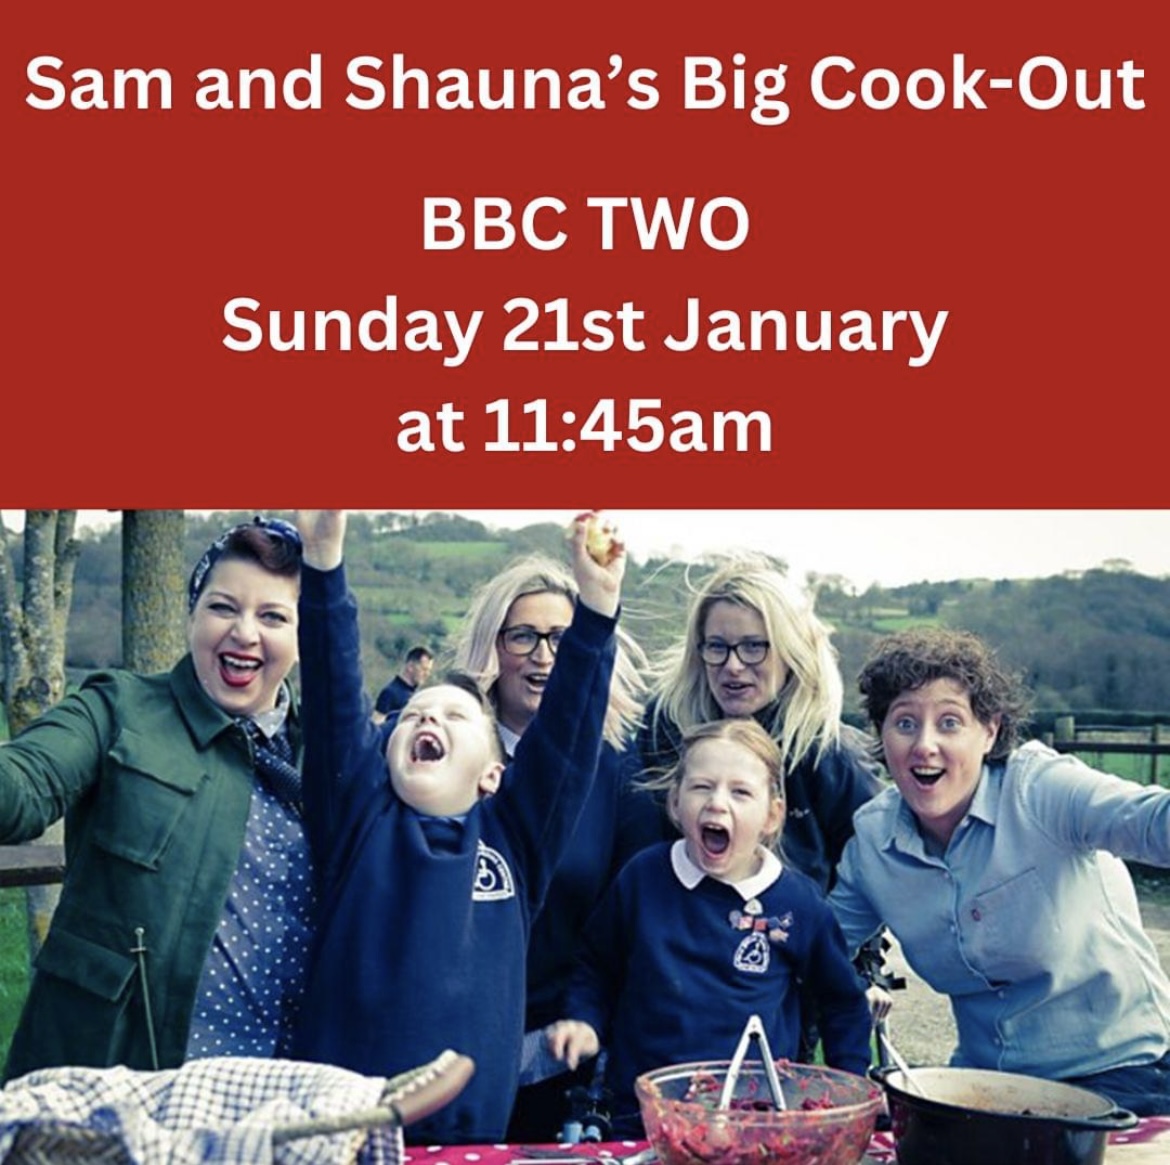 Sunday on @BBCTwo, another chance to catch queens of barbecue @samandshauna of @hangfirebbq sharing the food love! Cyfle arall i wledda gyda Sam a Shauna bore dydd Sul 😋